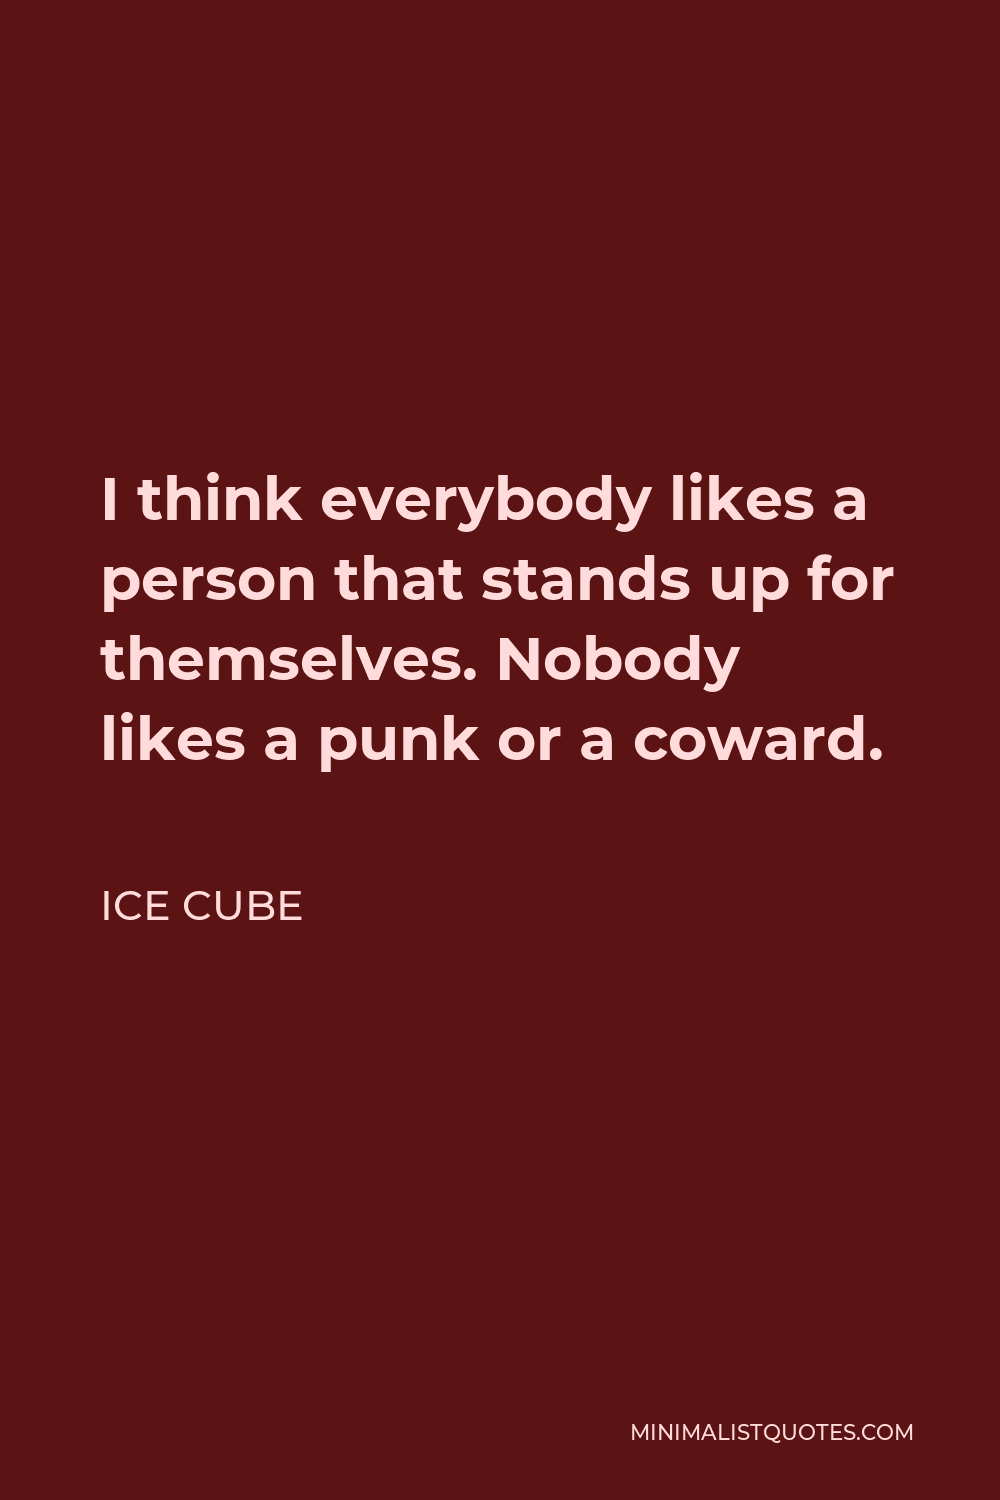 Ice Cube Quote - I think everybody likes a person that stands up for themselves. Nobody likes a punk or a coward.